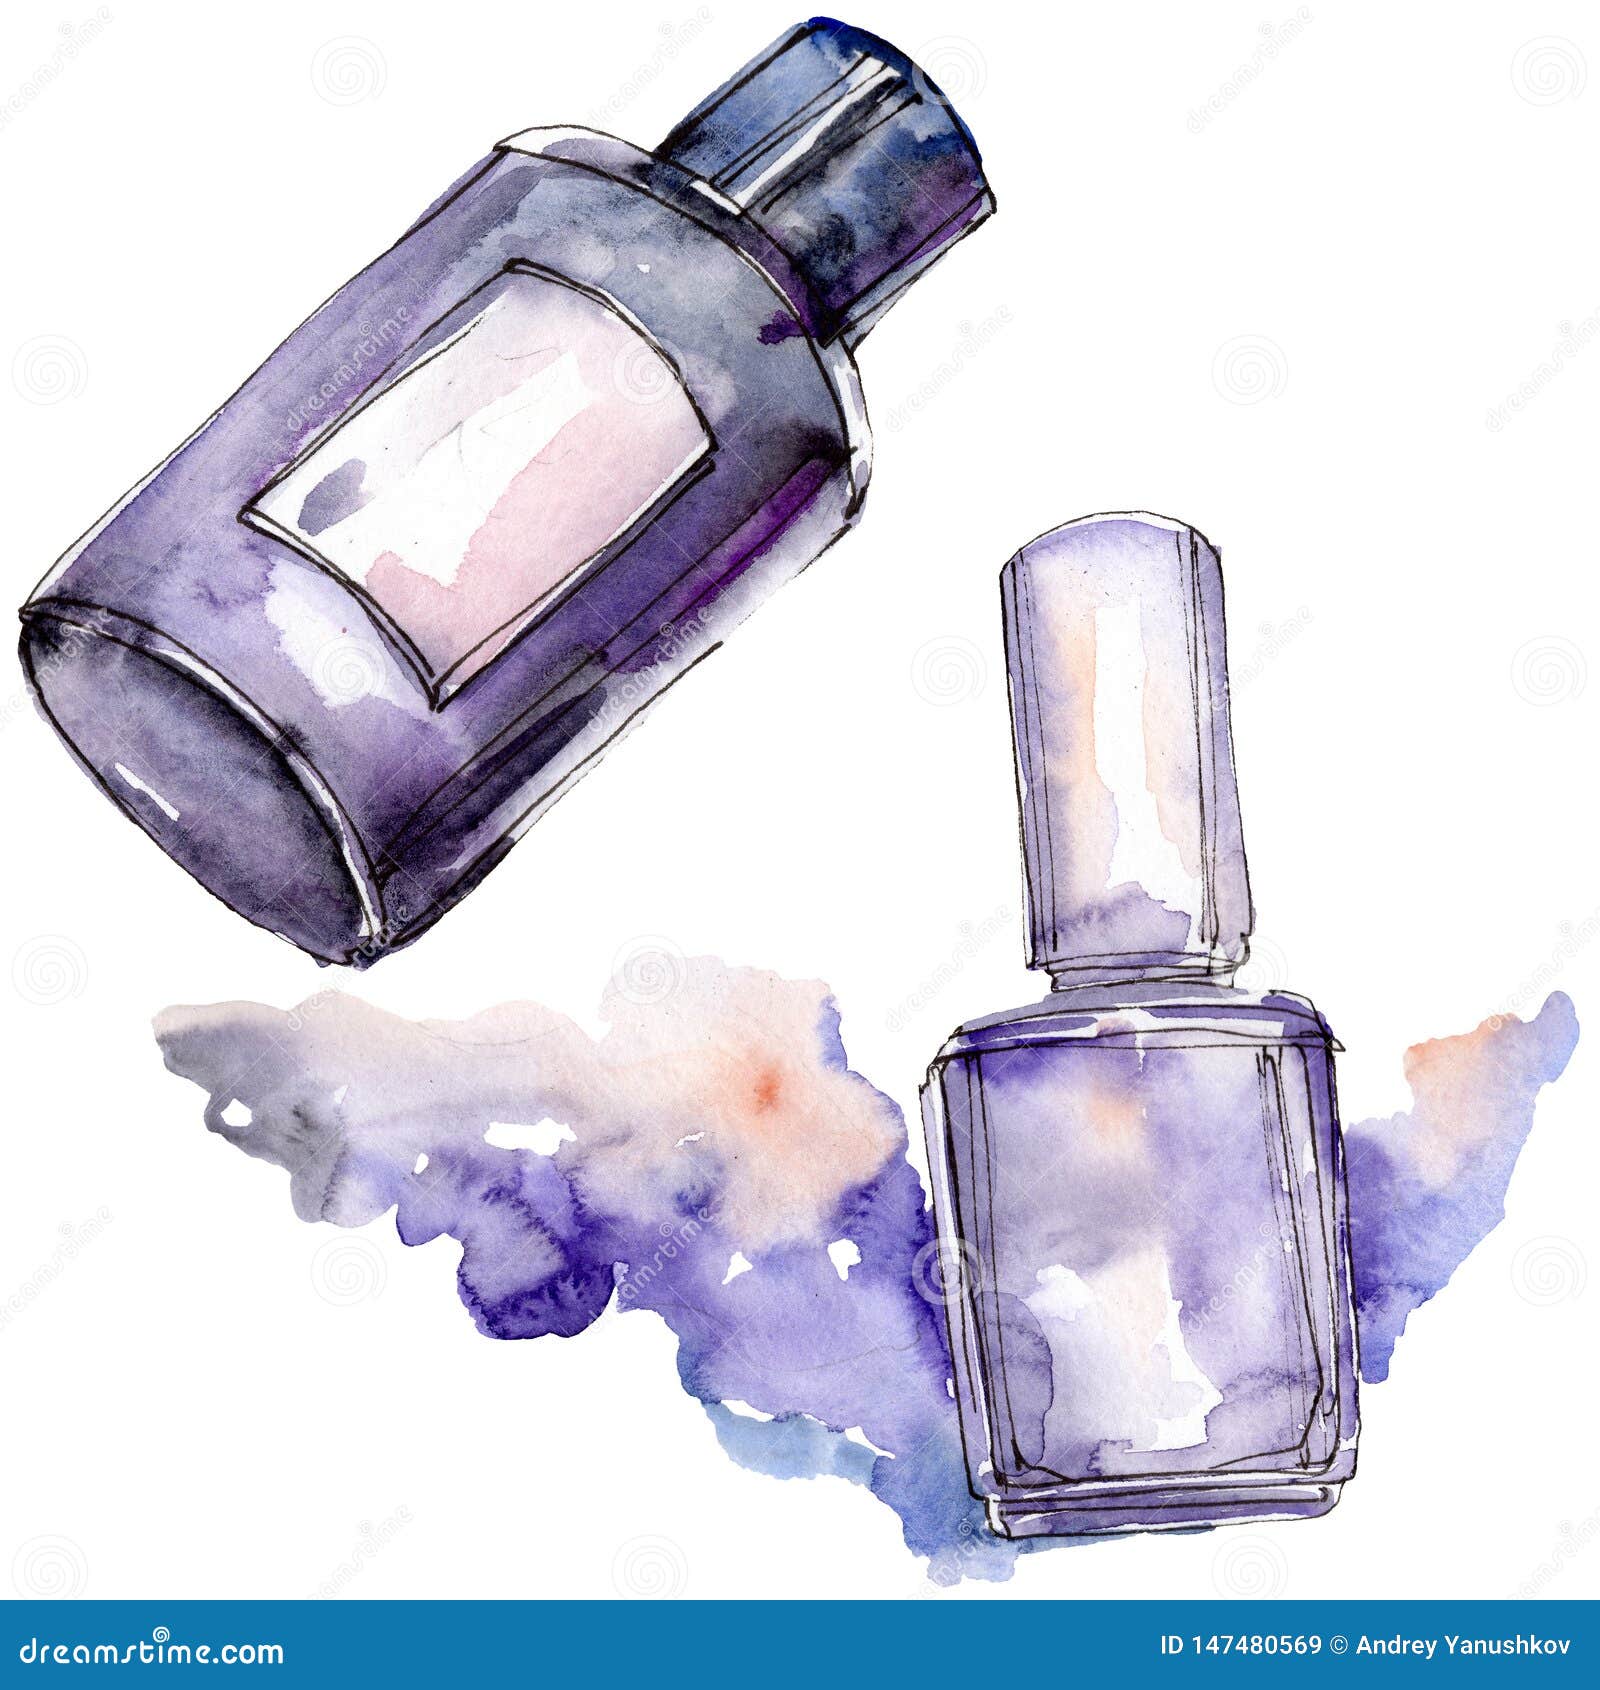 Nailpolish and Cosmetic Bottle Sketch Illustration in a Watercolor ...